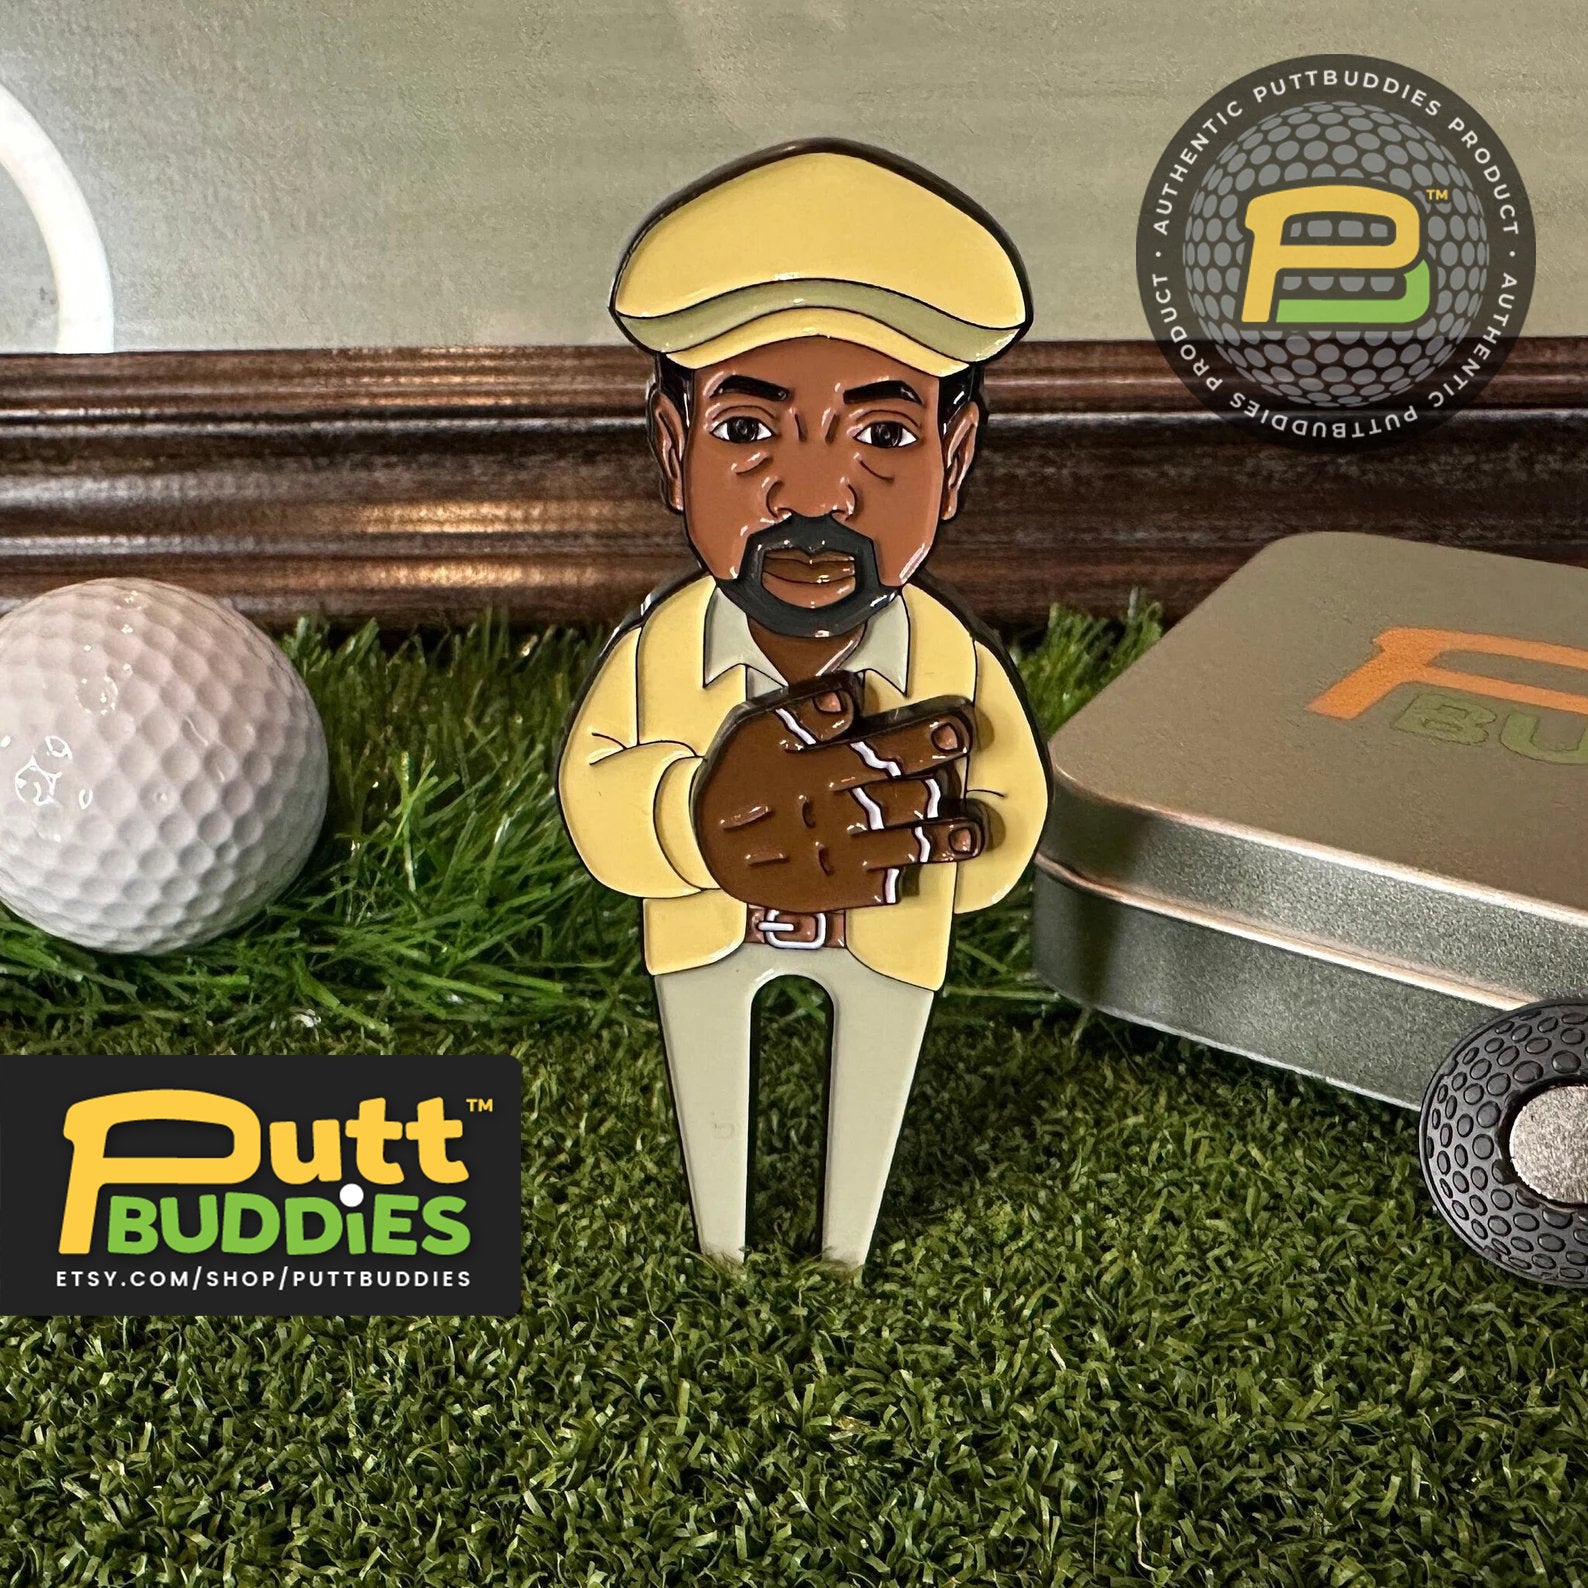 MASTER'S WEEK SALE PuttBuddies™ - Golf Coach Divot Tool and Ball Marker Gift Set, Gift for groomsmen, Unique Golf Accessories